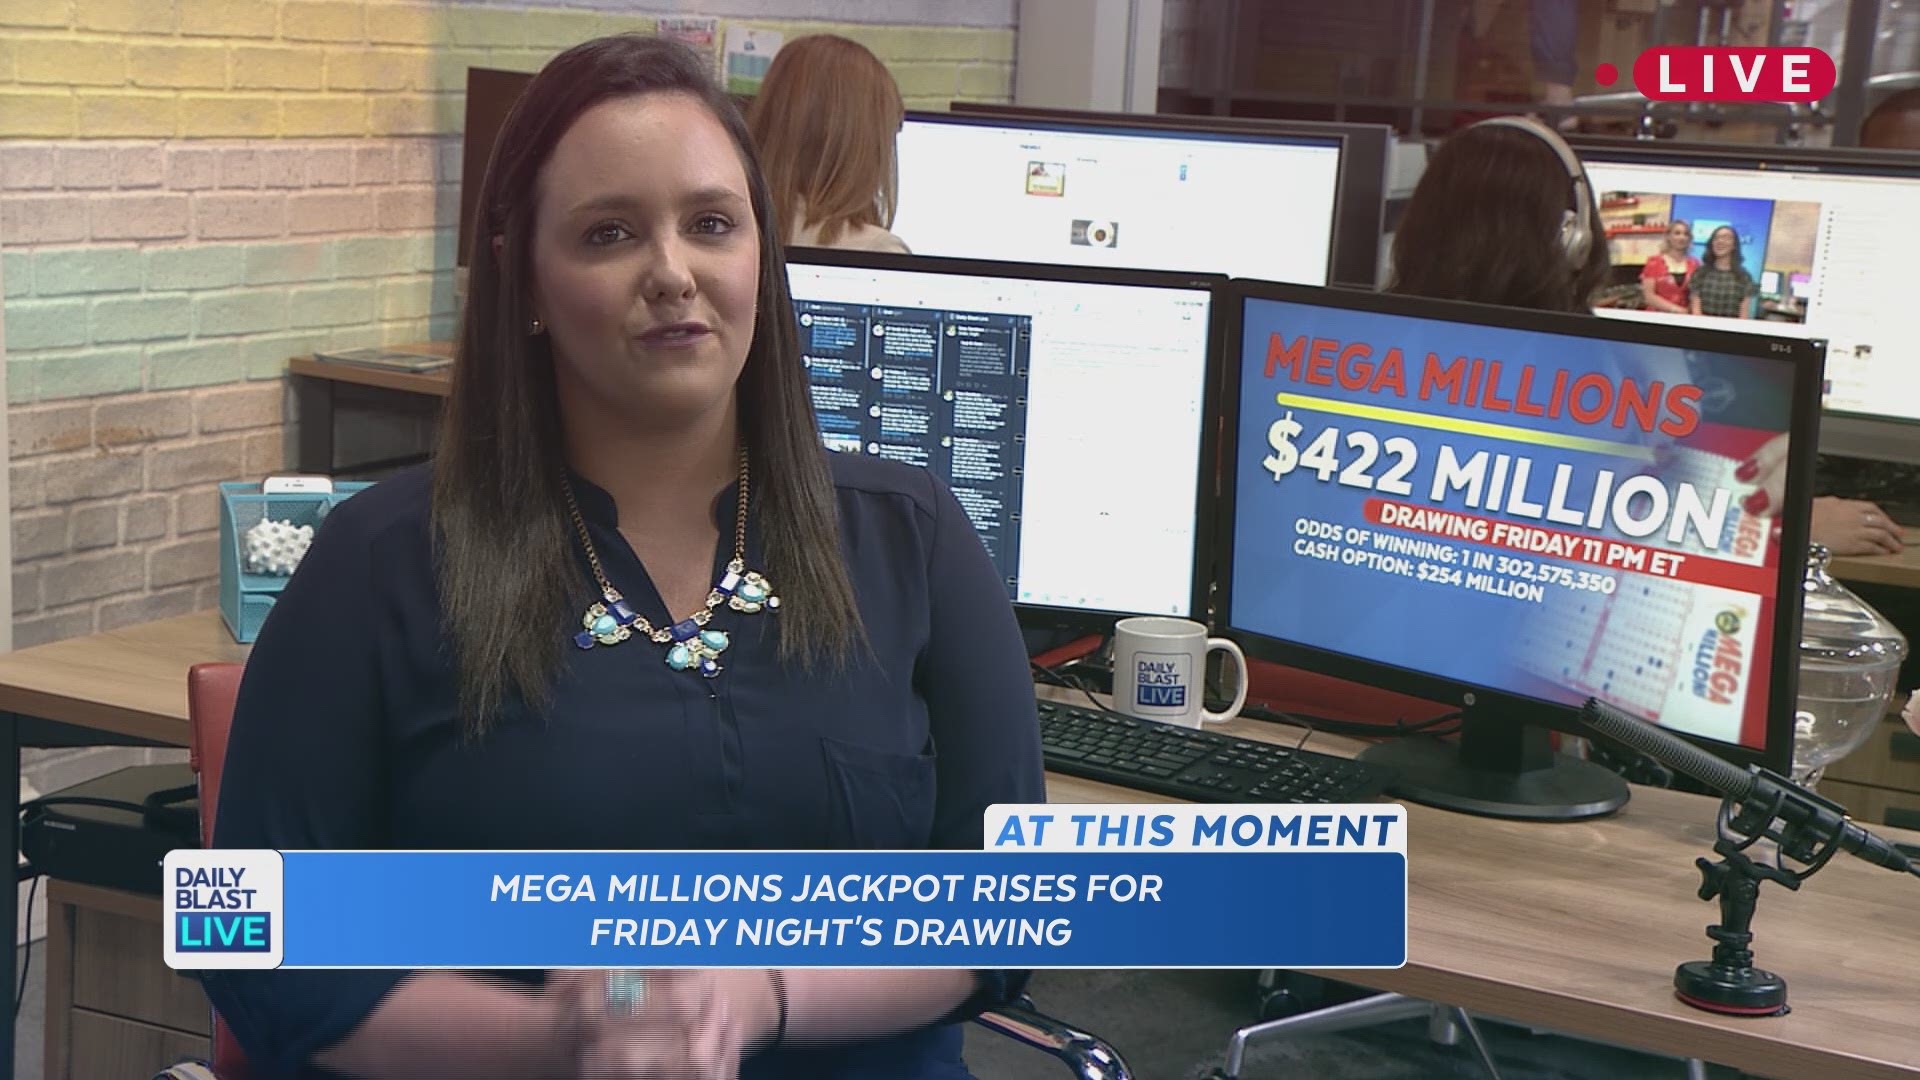 Are you feeling lucky? Mega Millions jackpot soars to $422 million after no ticket matched the Tuesday night drawing. If won, the $422 million jackpot would be the sixth largest Mega Millions payout in history. Daily Blast LIVE is brining all the details